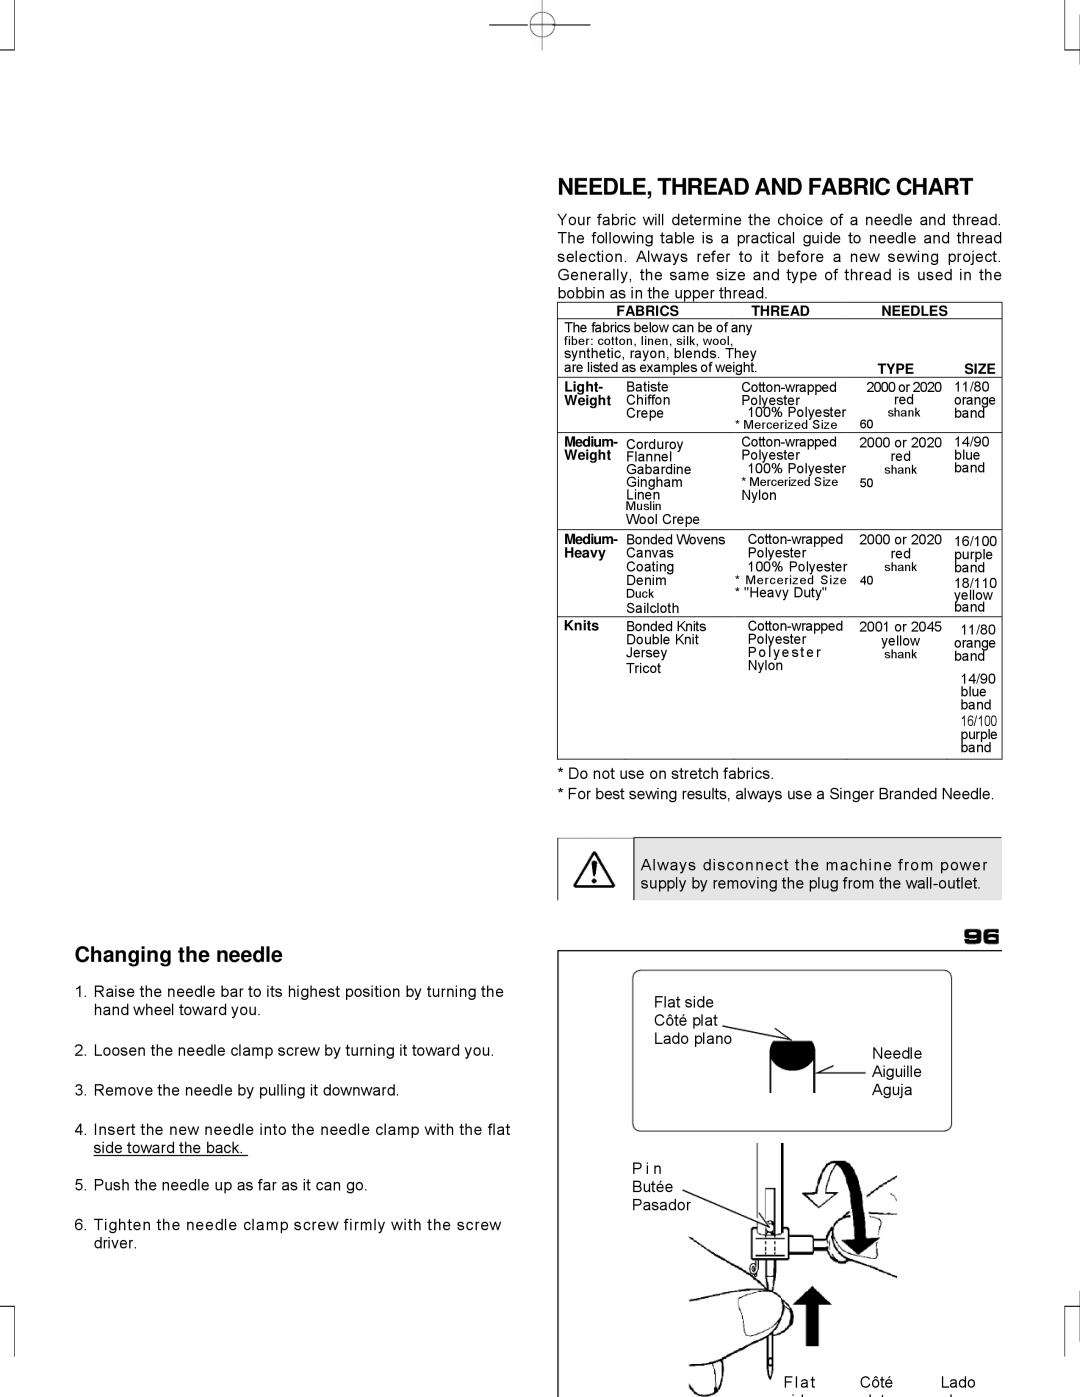 Singer CE-150 instruction manual NEEDLE, Thread and Fabric Chart, Changing the needle 